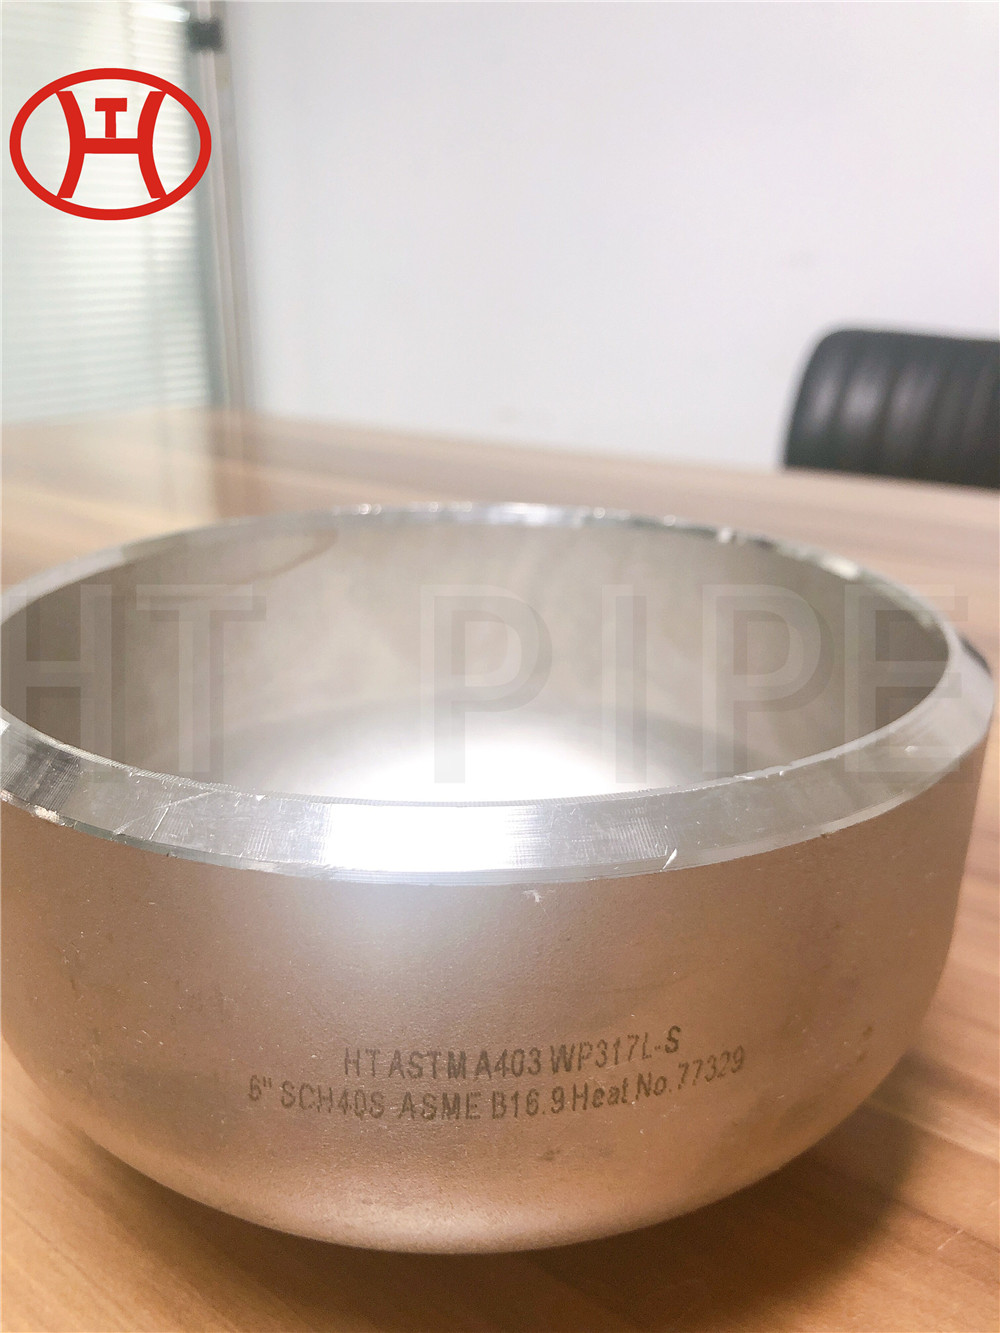 ASTM A403 WP317 Stainless Steel B16.9 Fitting Cap